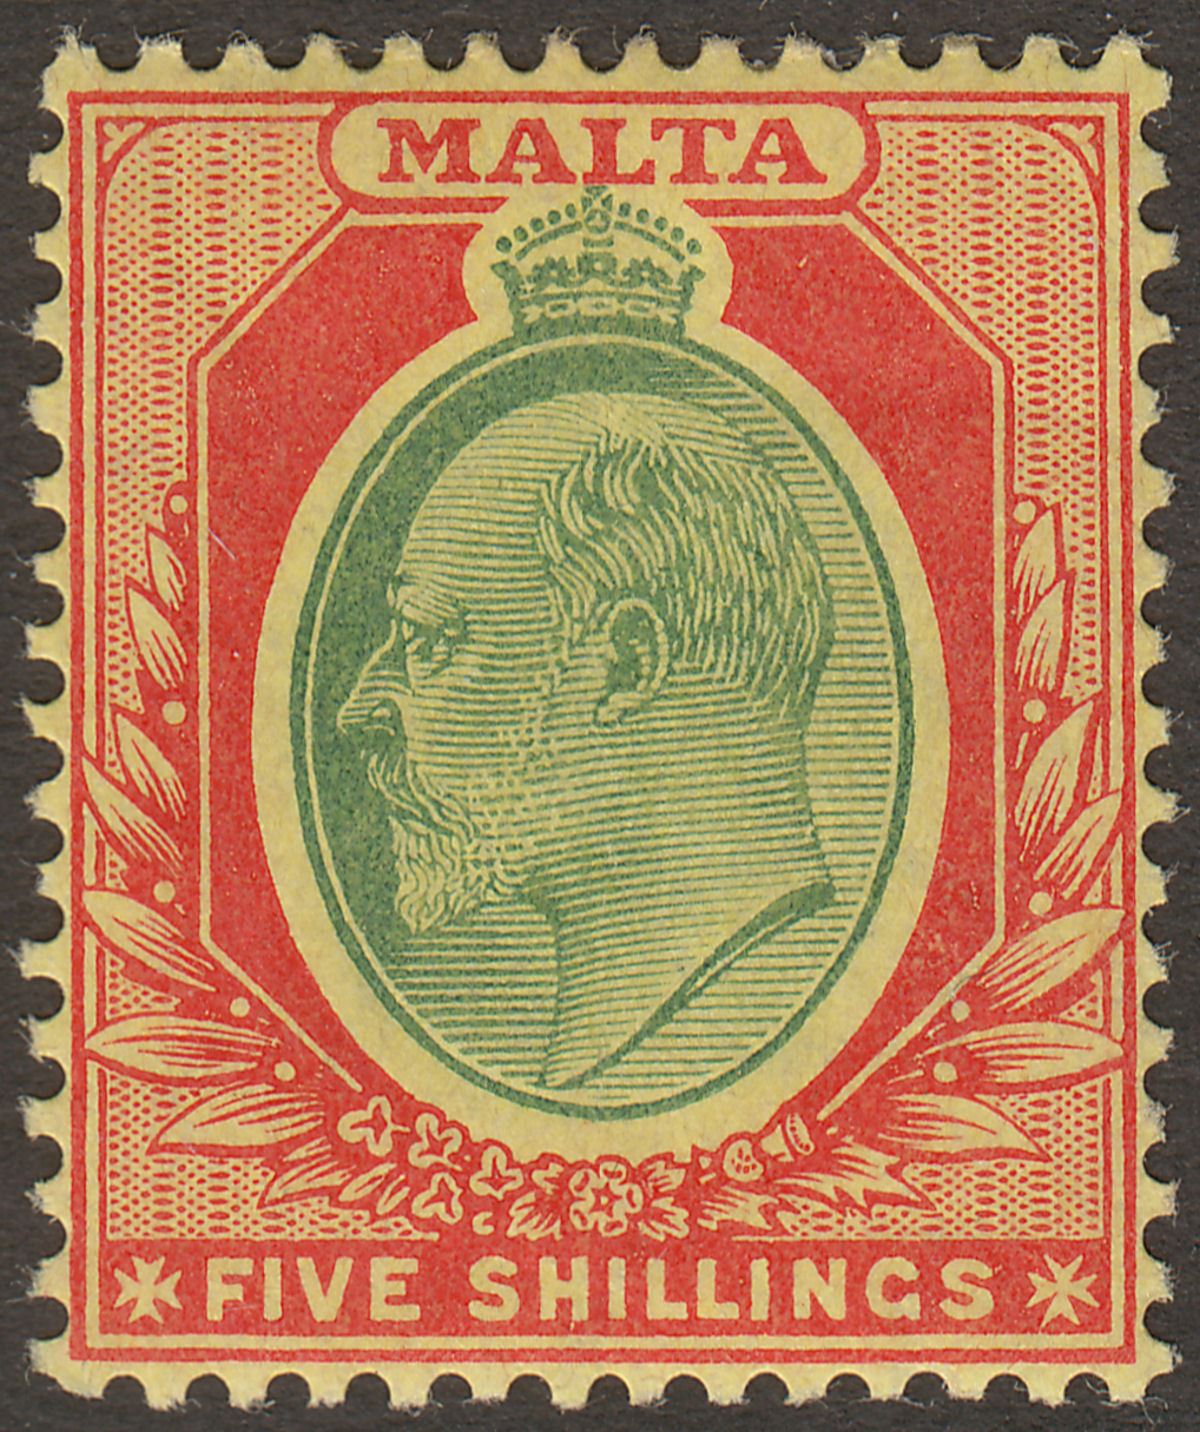 Malta 1911 KEVII 5sh Green and Red on Yellow Mint SG63 cat £65